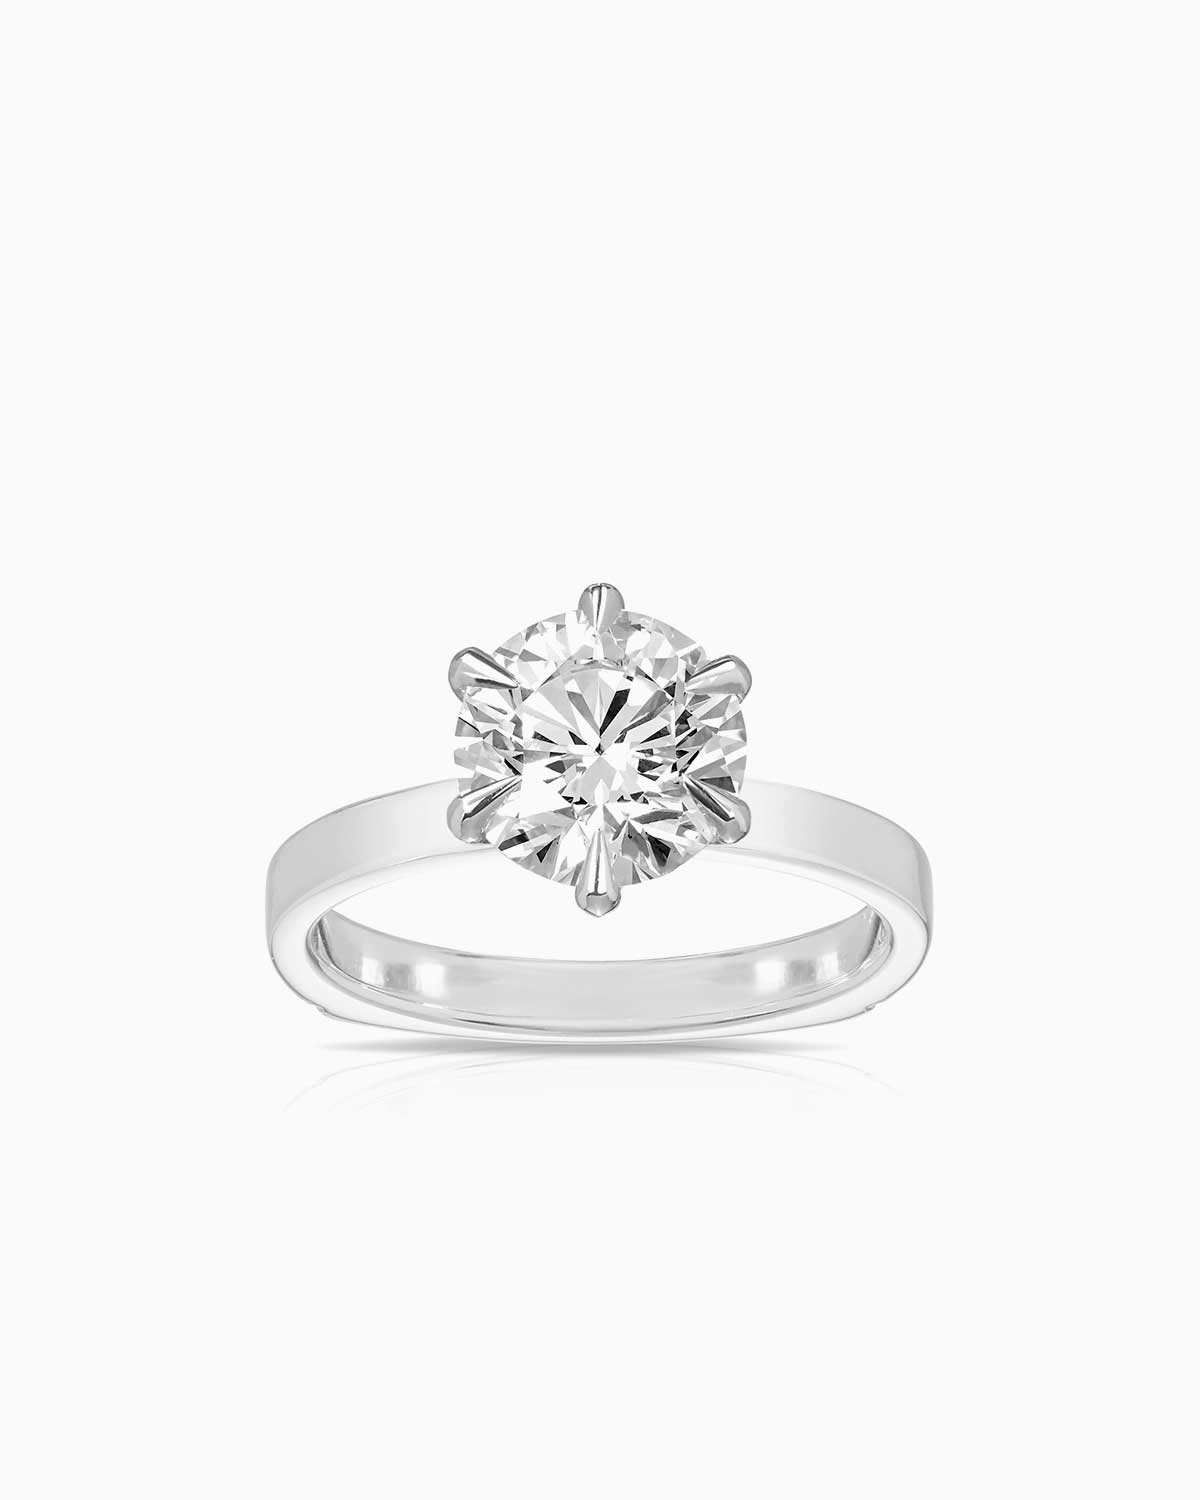 6 claw diamond solitaire engagement ring in 18 karat white gold by claude and me jewellery